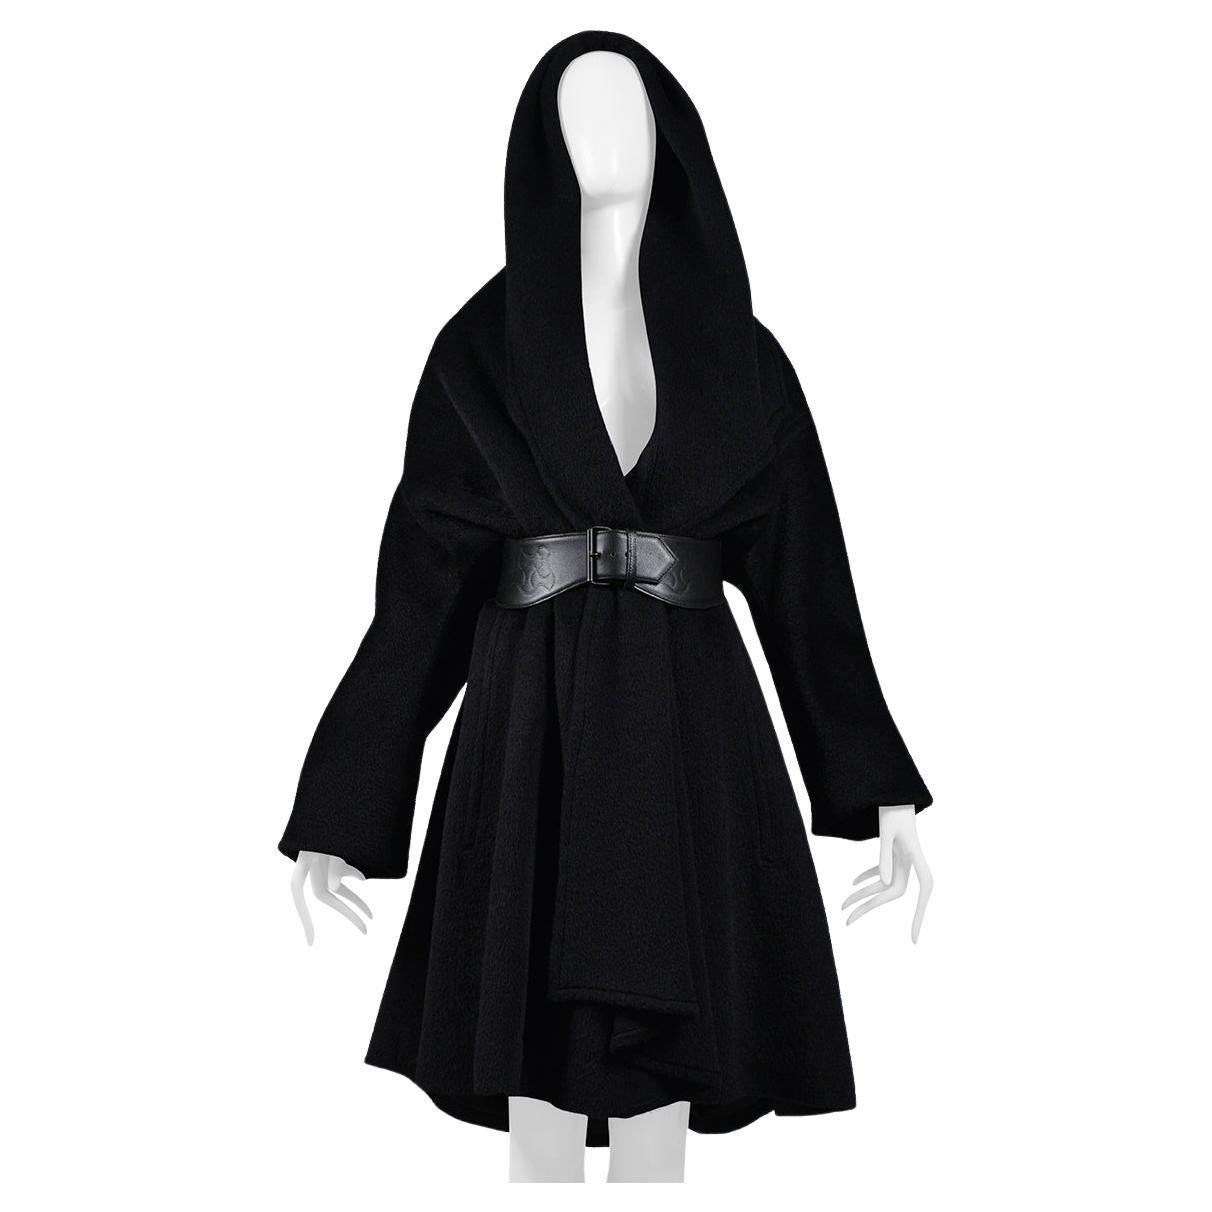 Resurrection Vintage is thrilled to offer a vintage statement Thierry Mugler black hooded cape coat featuring a dramatic hood and collar with folded detail at front, invisible button front closure, side pockets, gathered fabric on hood, long sleeves